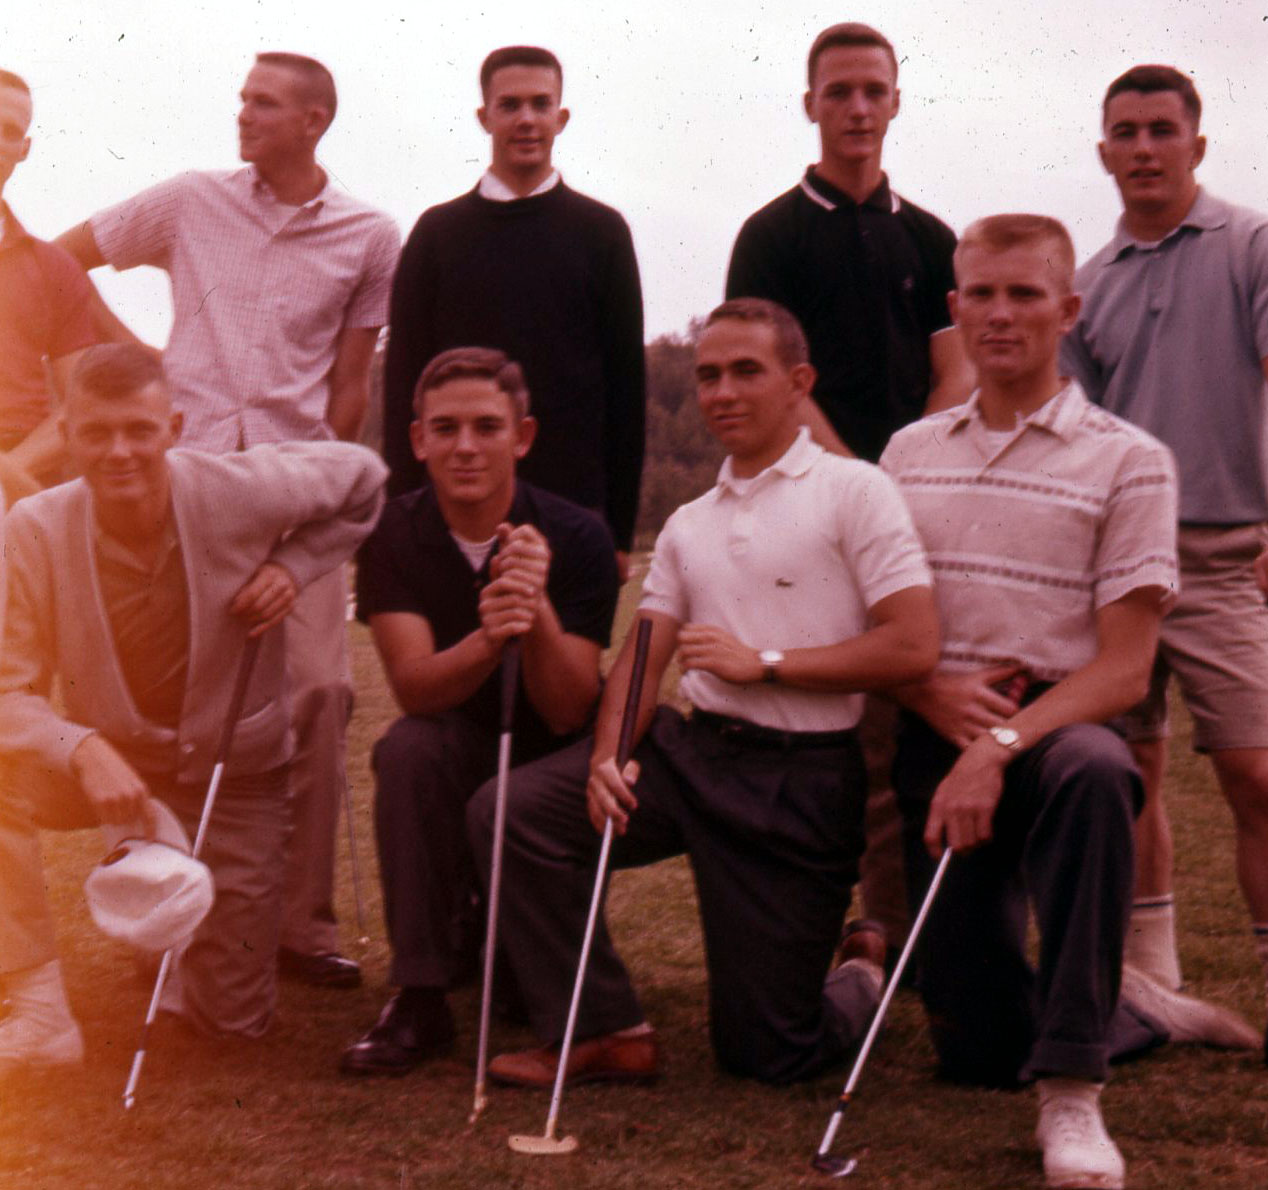 a group of men are posing for a picture